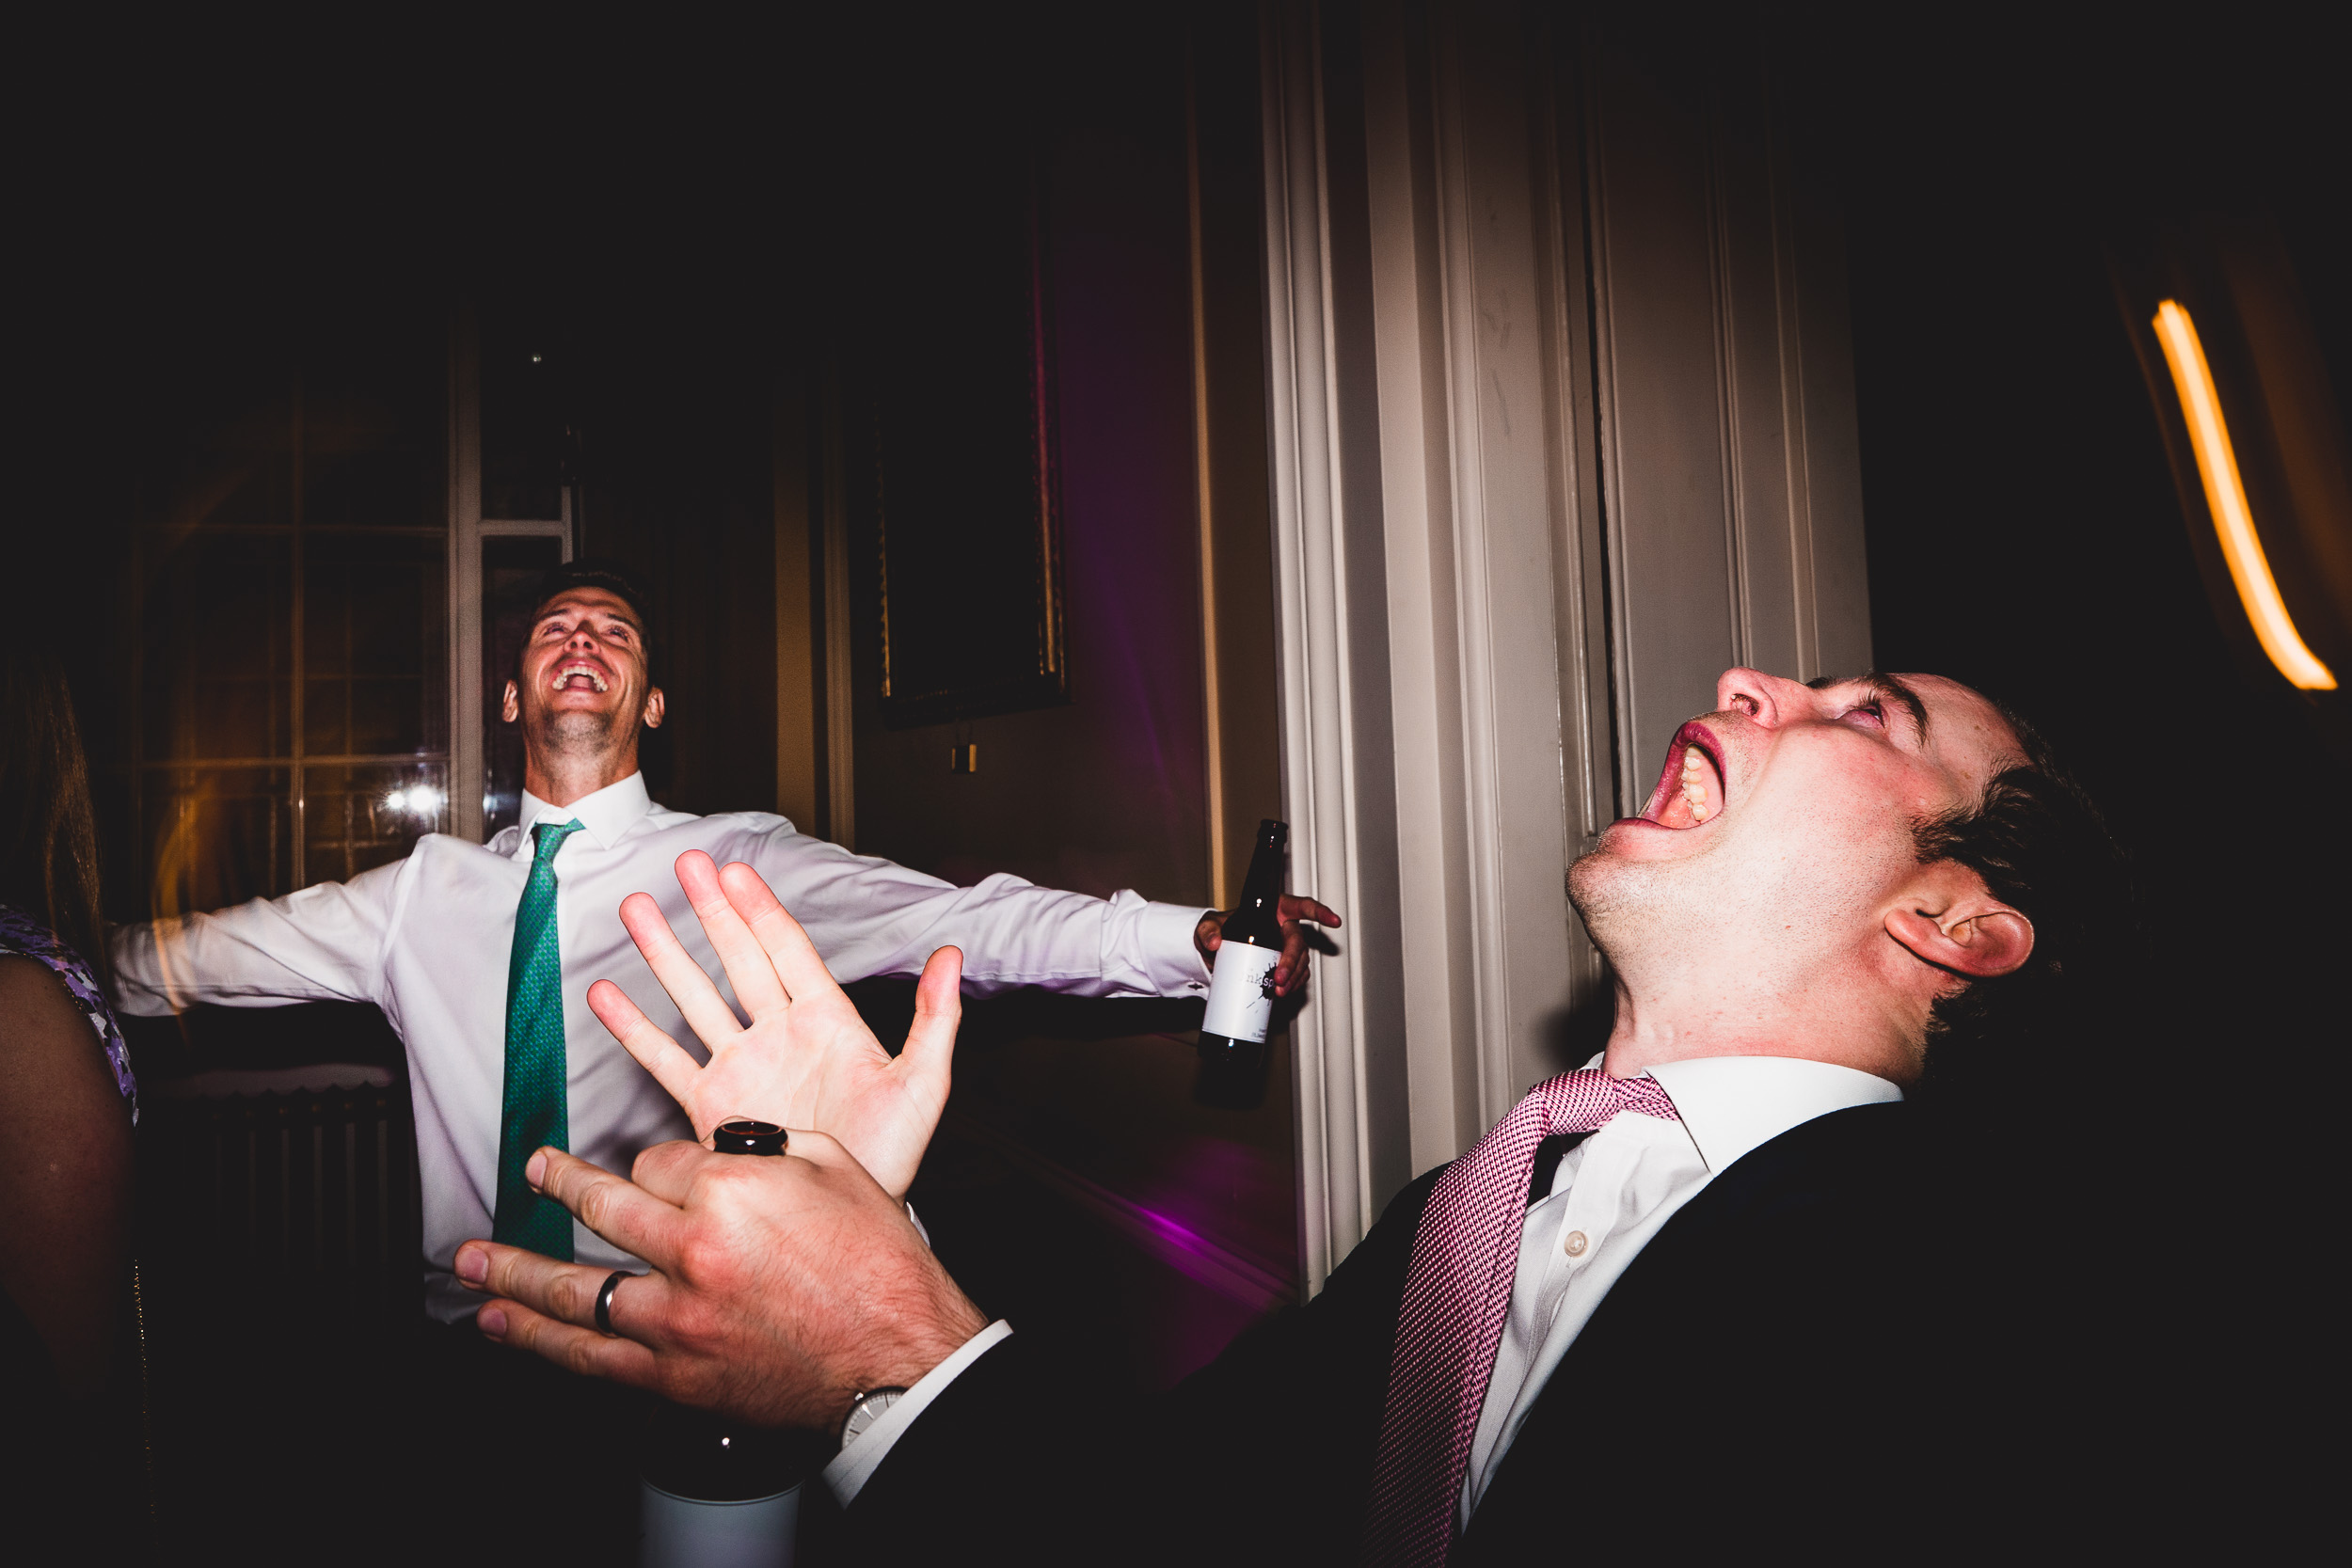 A groom in a suit is yelling at the bride in a wedding photo.